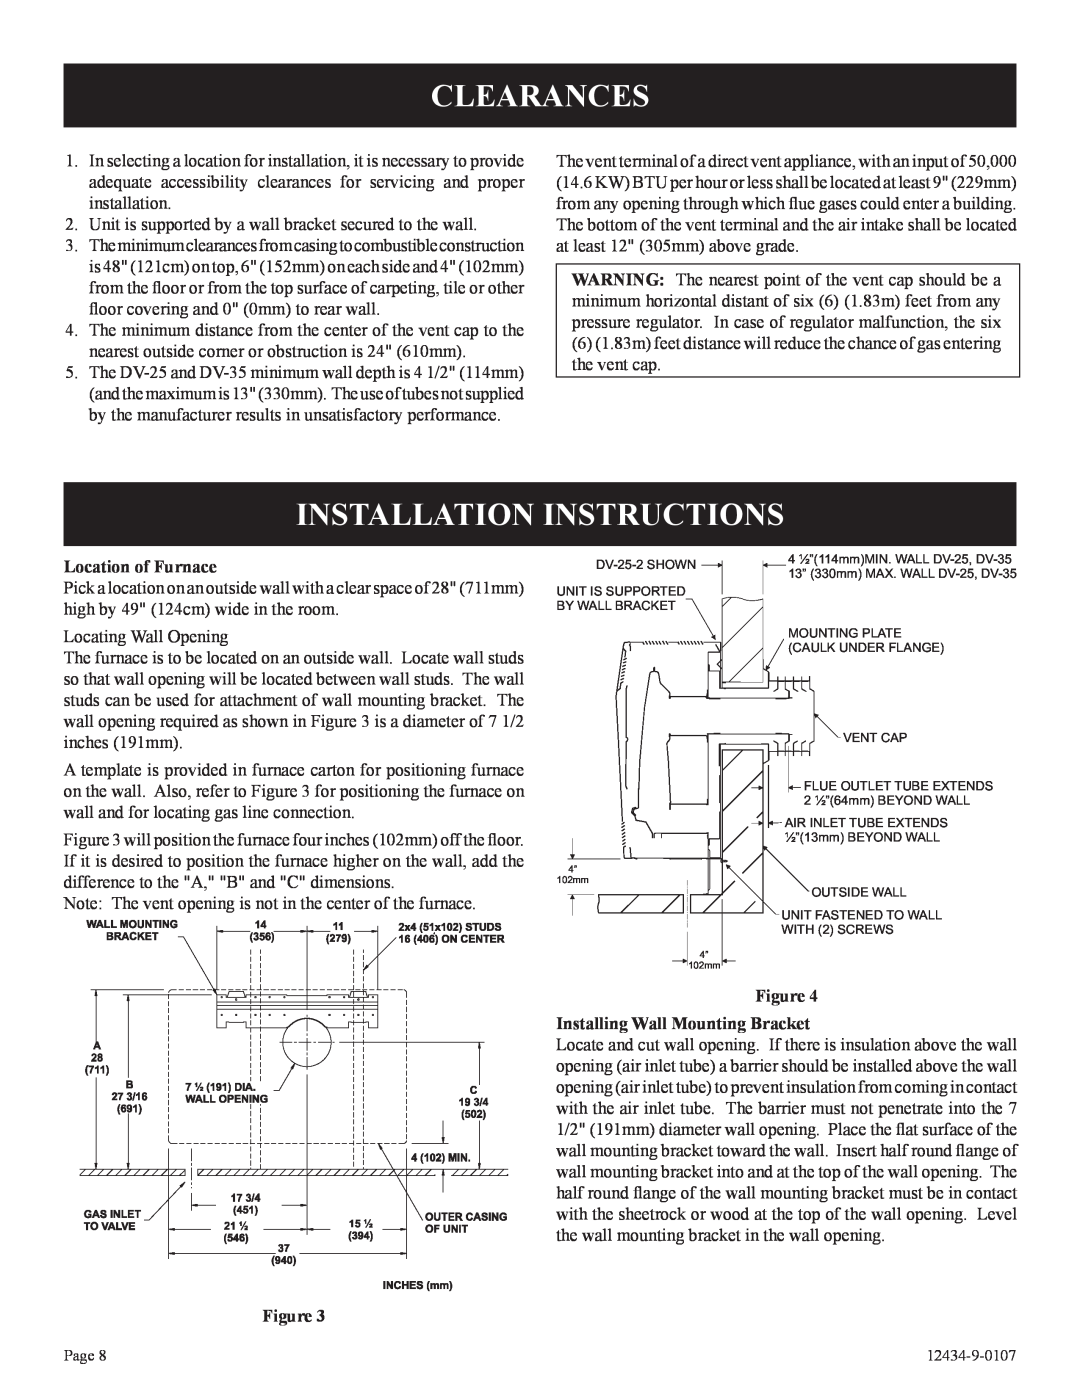 Empire Comfort Systems DV-35-2SG installation instructions Clearances, Installation Instructions, Location of Furnace 